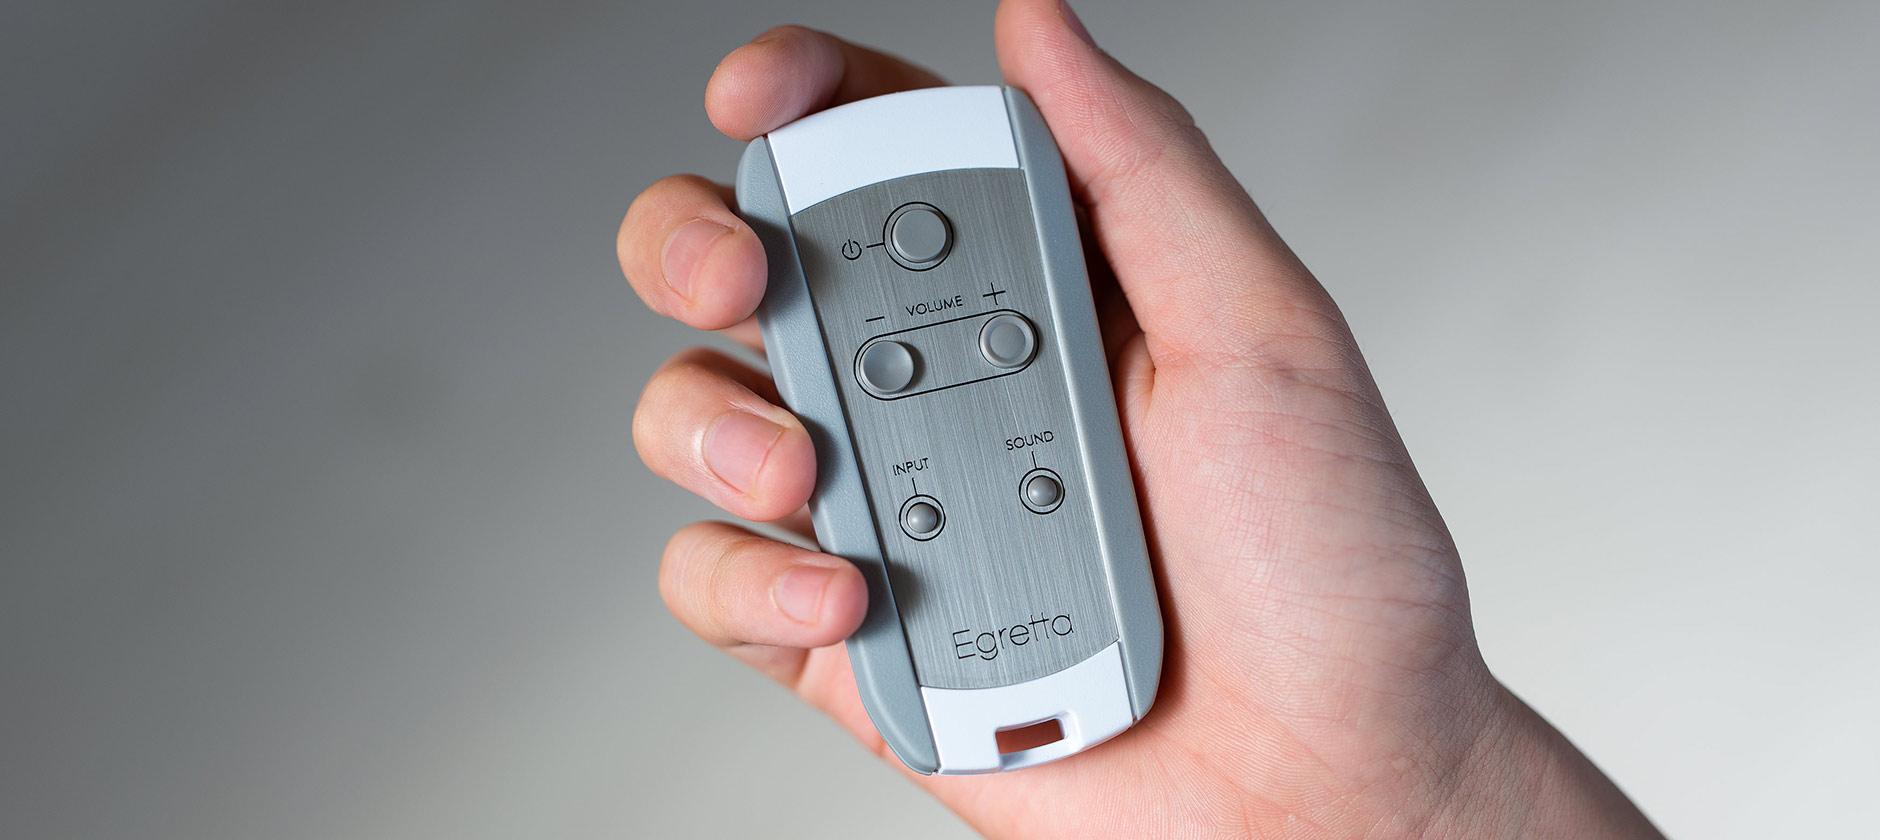 The remote control which can unite with the body